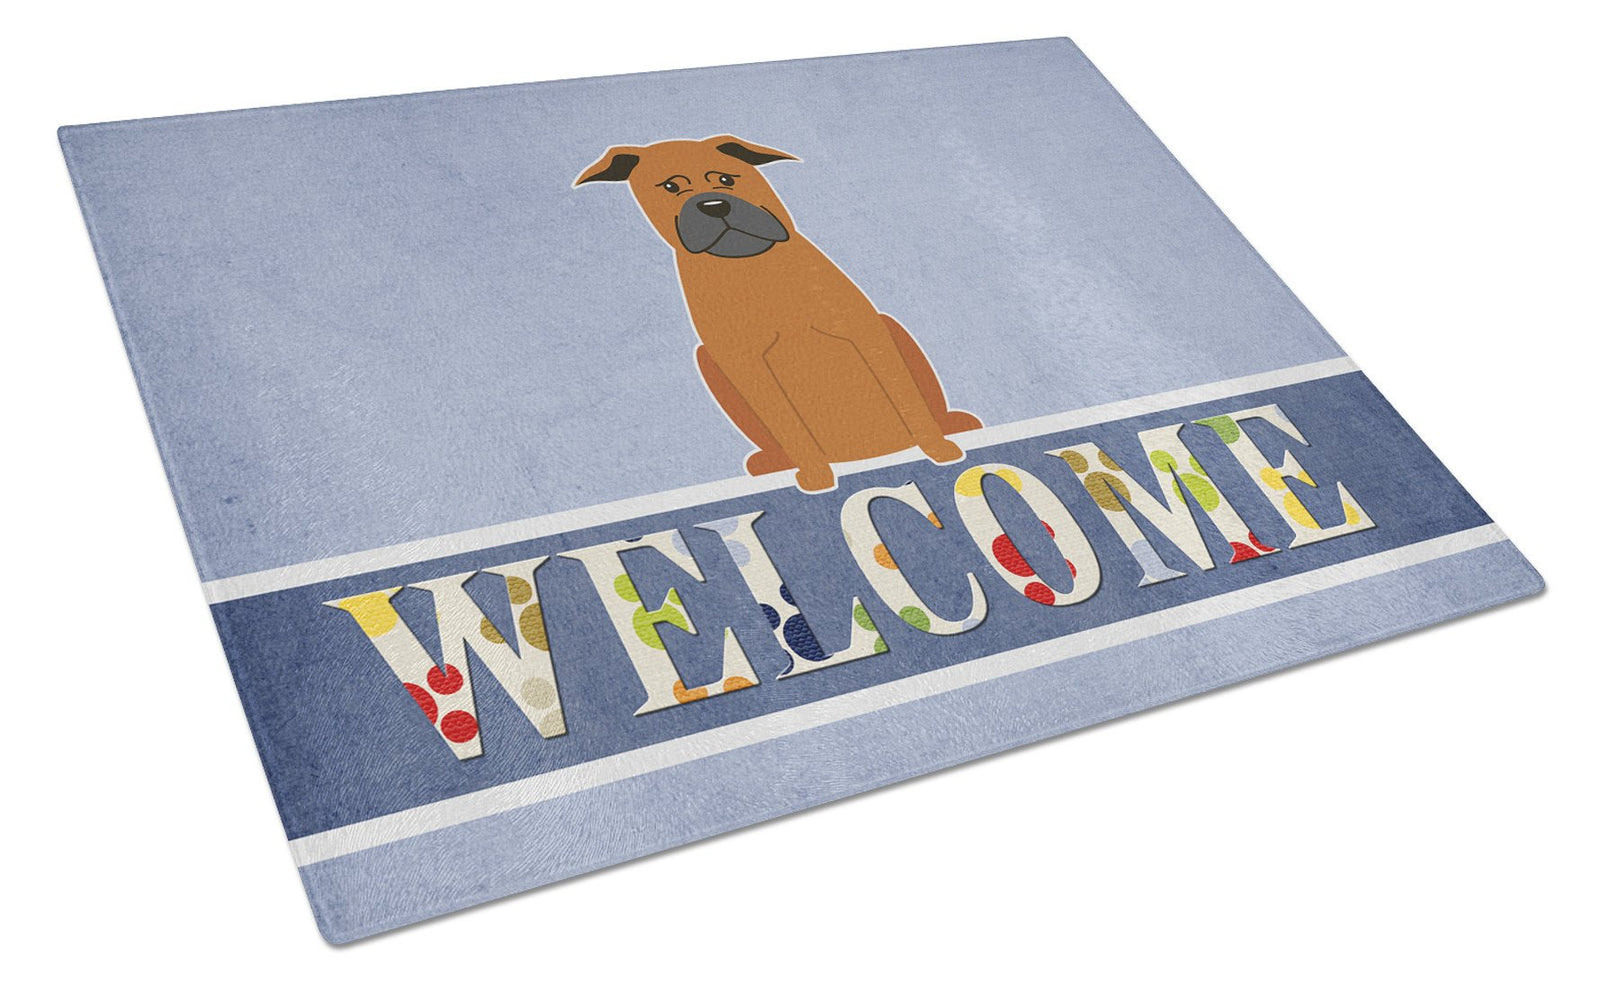 Chinese Chongqing Dog Welcome Glass Cutting Board Large BB5692LCB by Caroline's Treasures